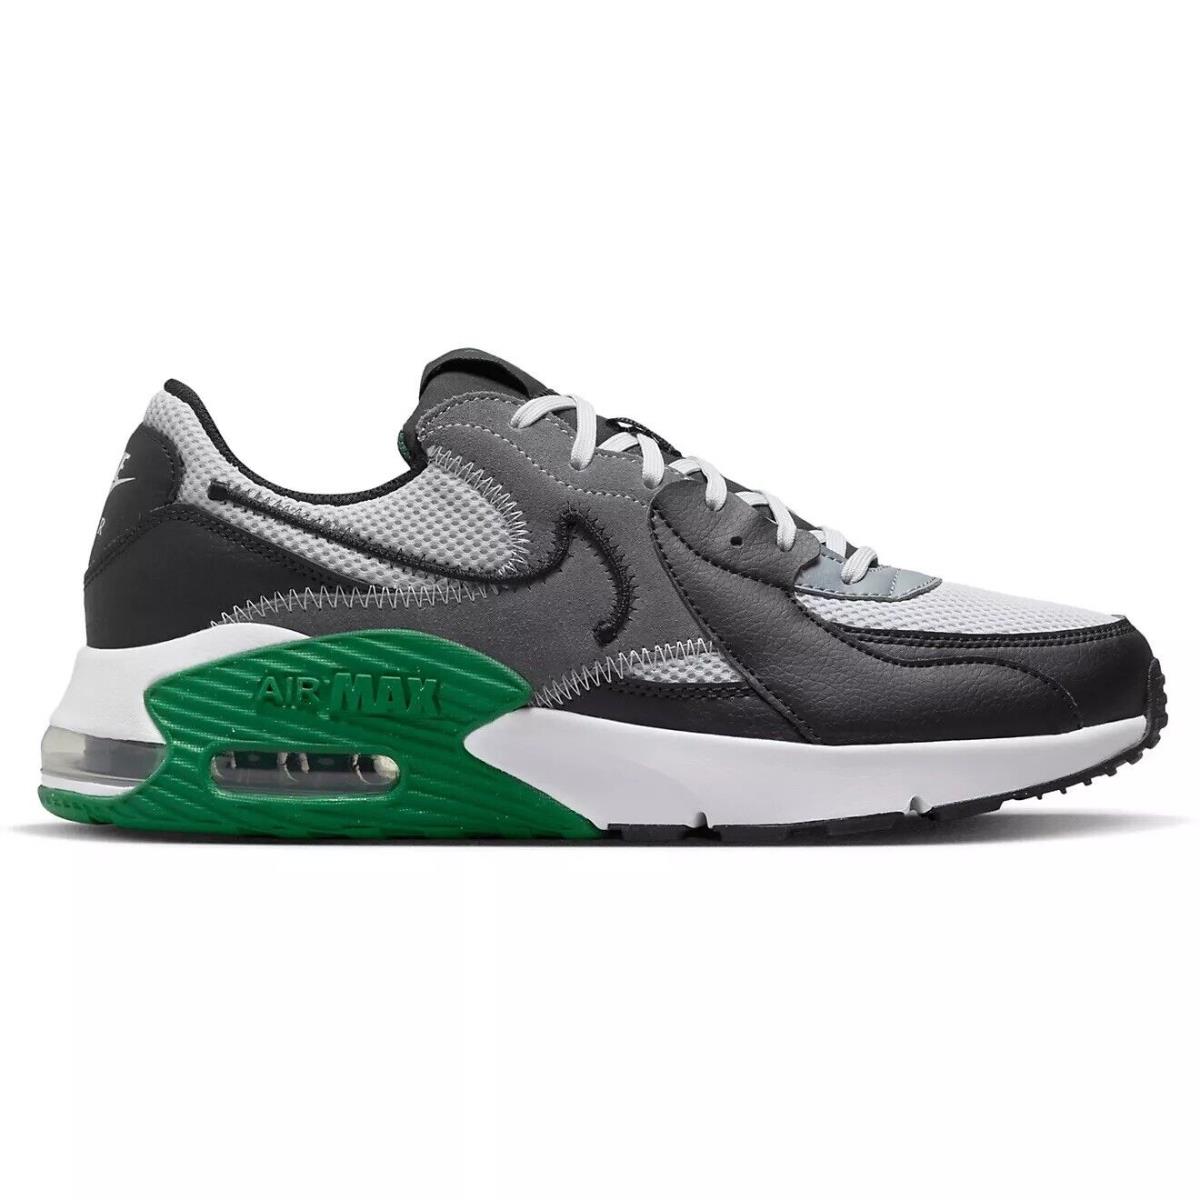 Mens Nike Air Max Excee Running Shoes Sneakers White Black Green CD4165 018 - Multicolor